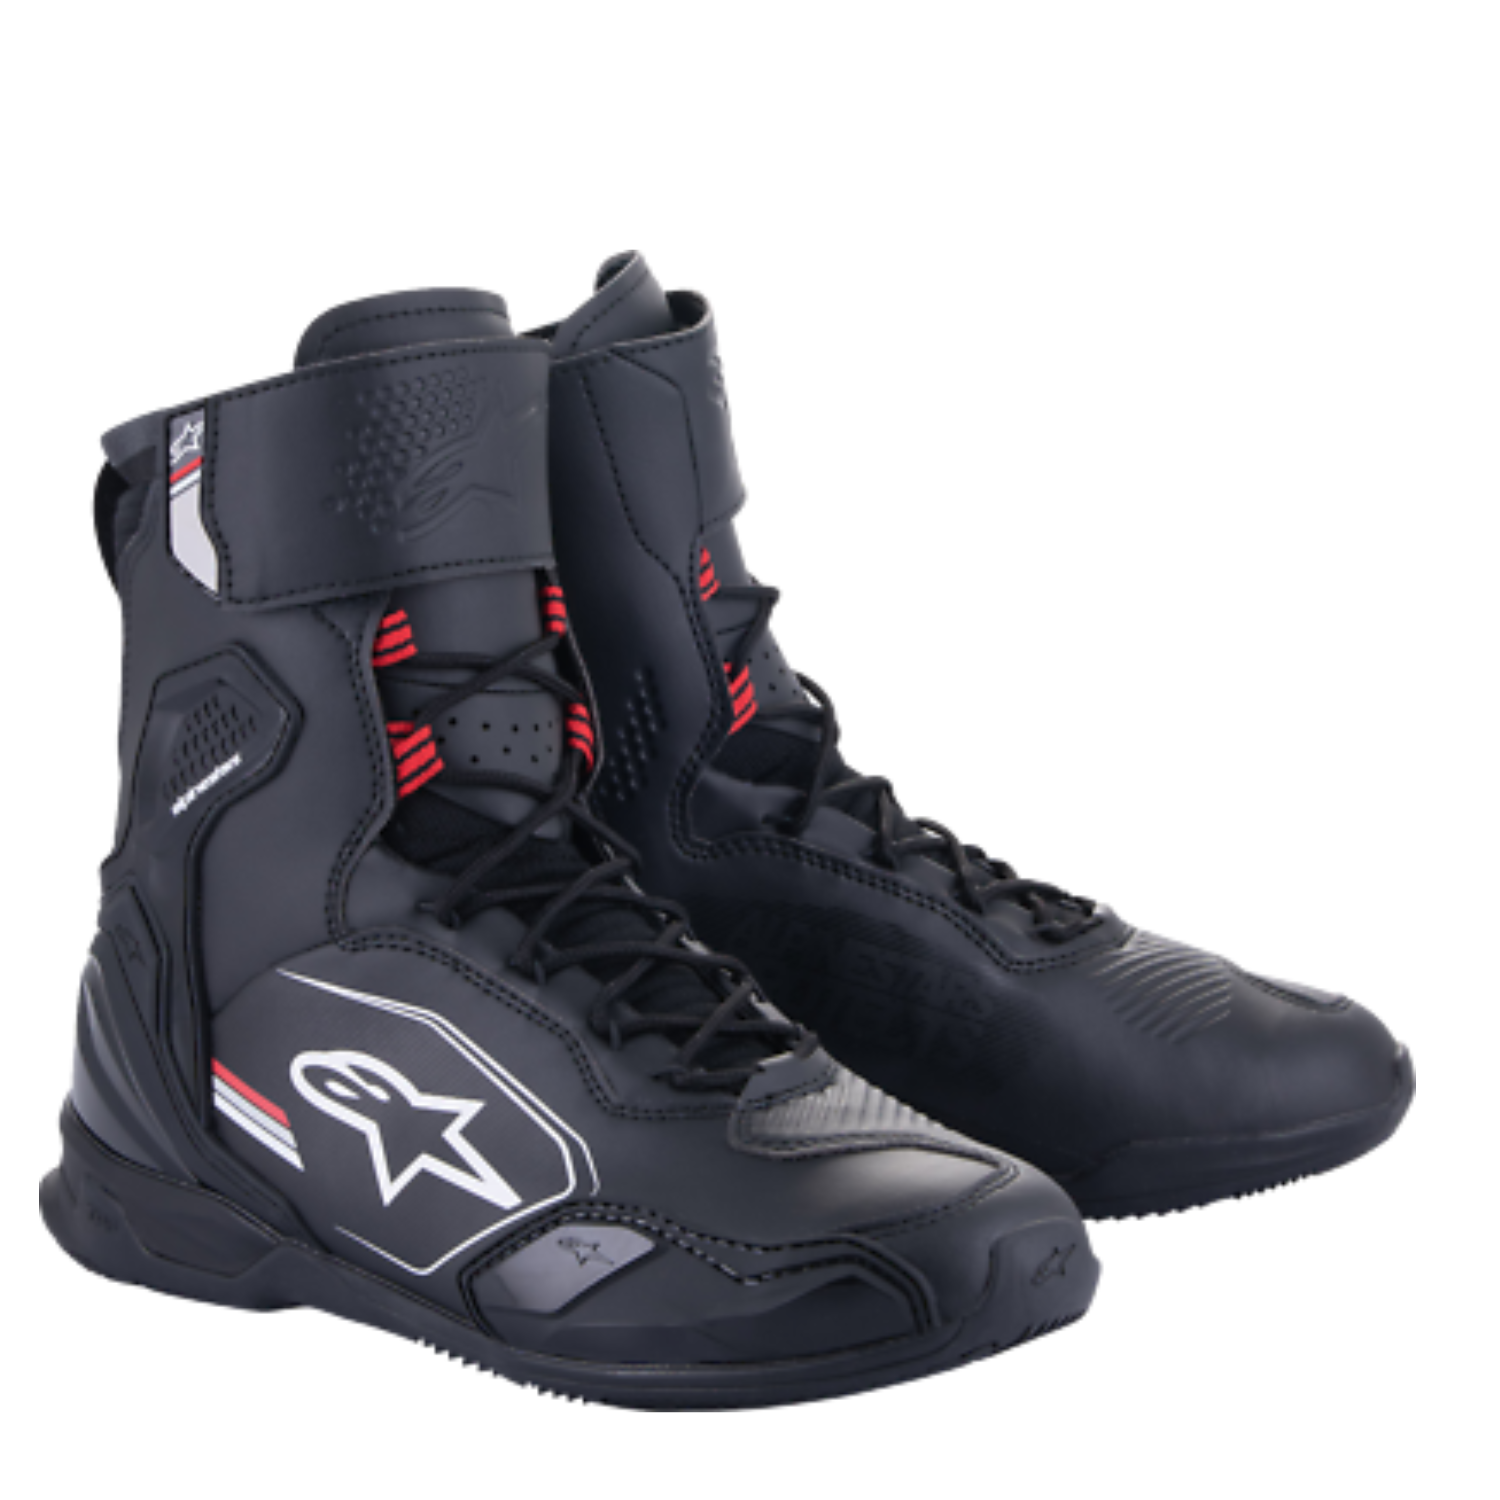 Image of Alpinestars Superfaster Shoes Black Gray Bright Red Size US 8 EN